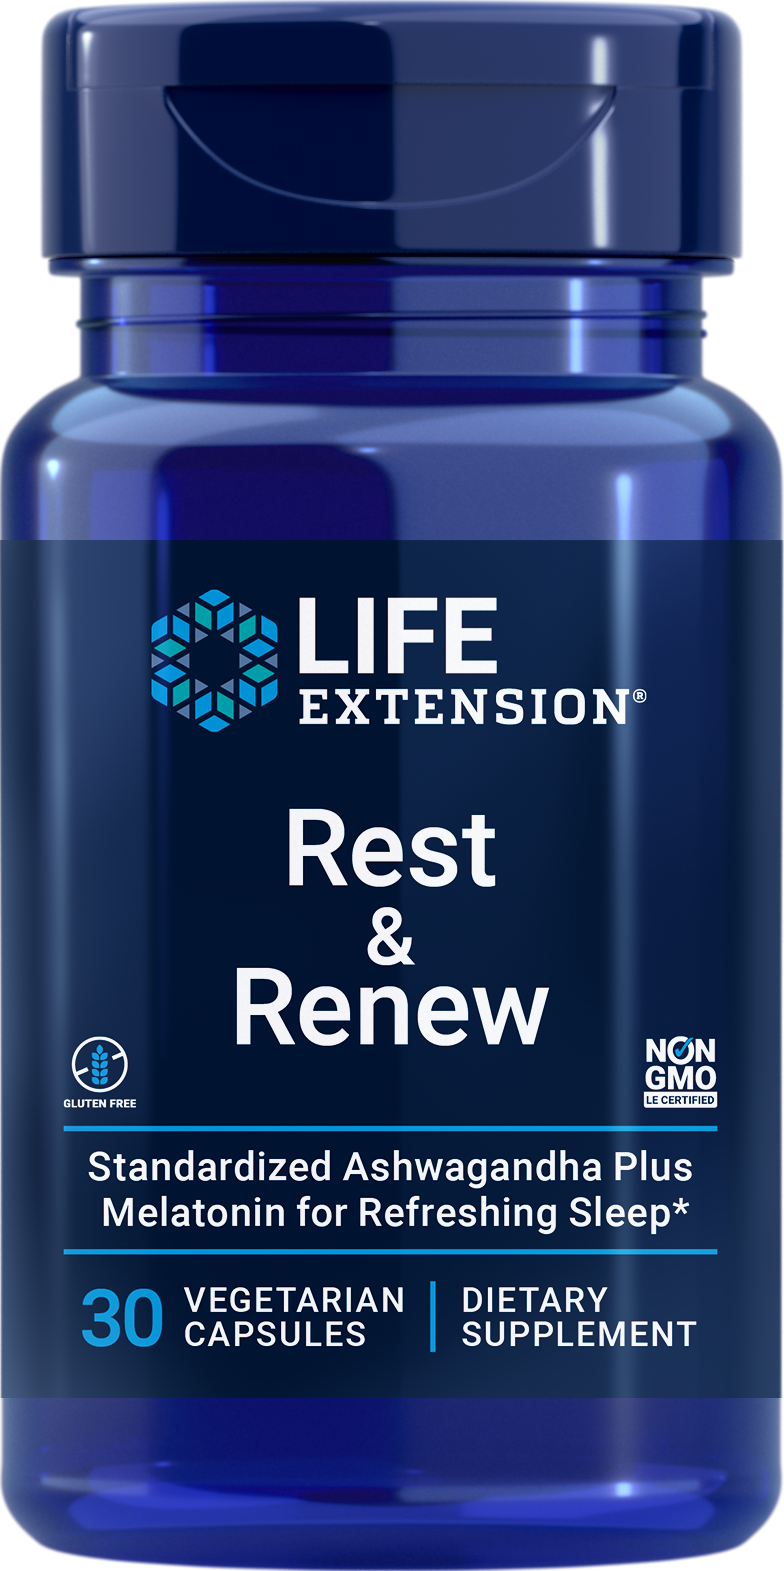 Life Extension new Rest and Renew supplement non-GMO vegetarian gluten free